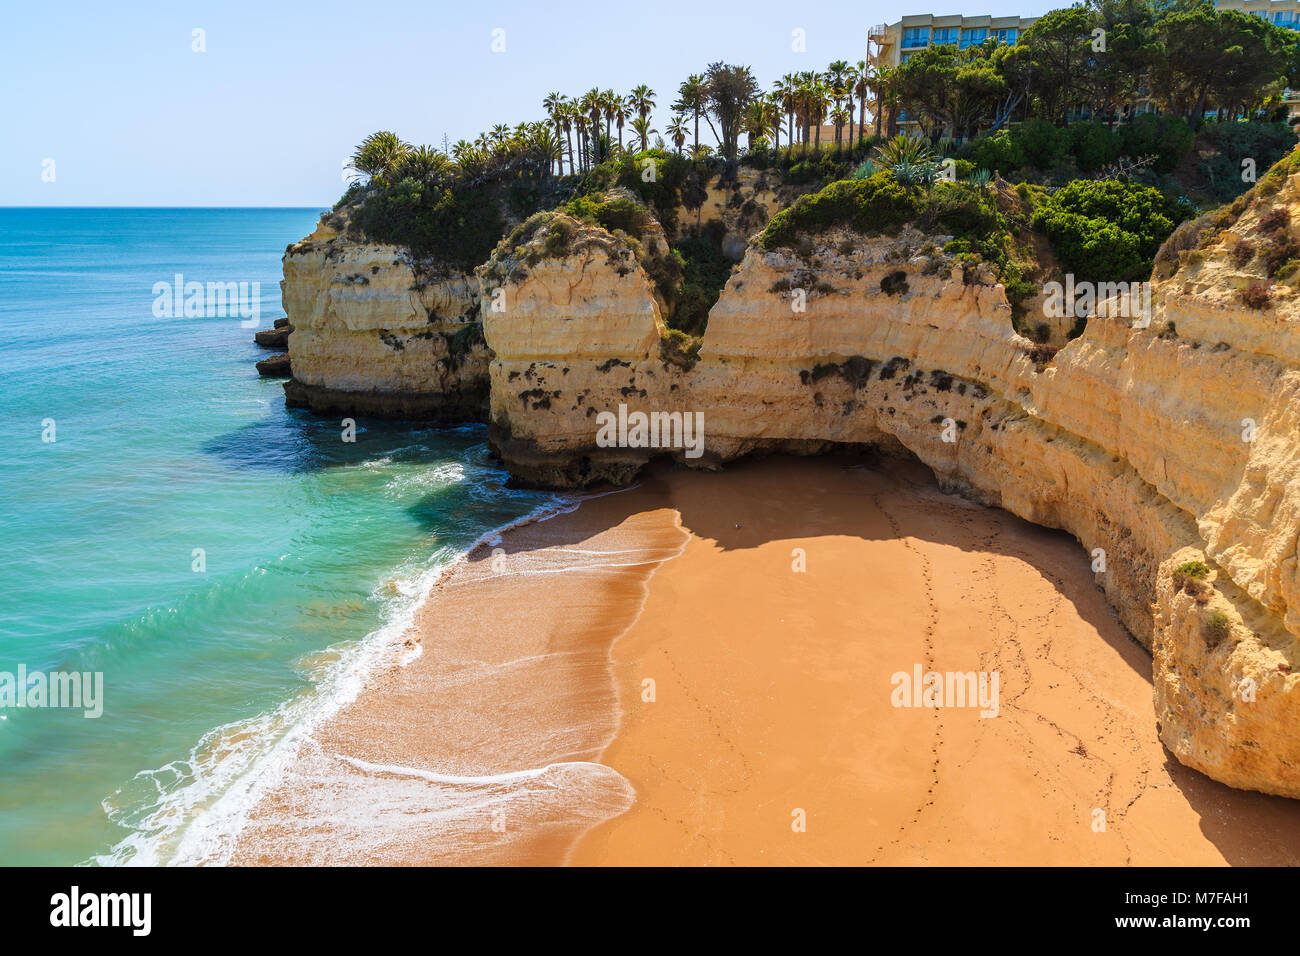 View of beach in small bay hotel building on high cliff in Armacao de Pera town, Algarve, Portugal Stock Photo